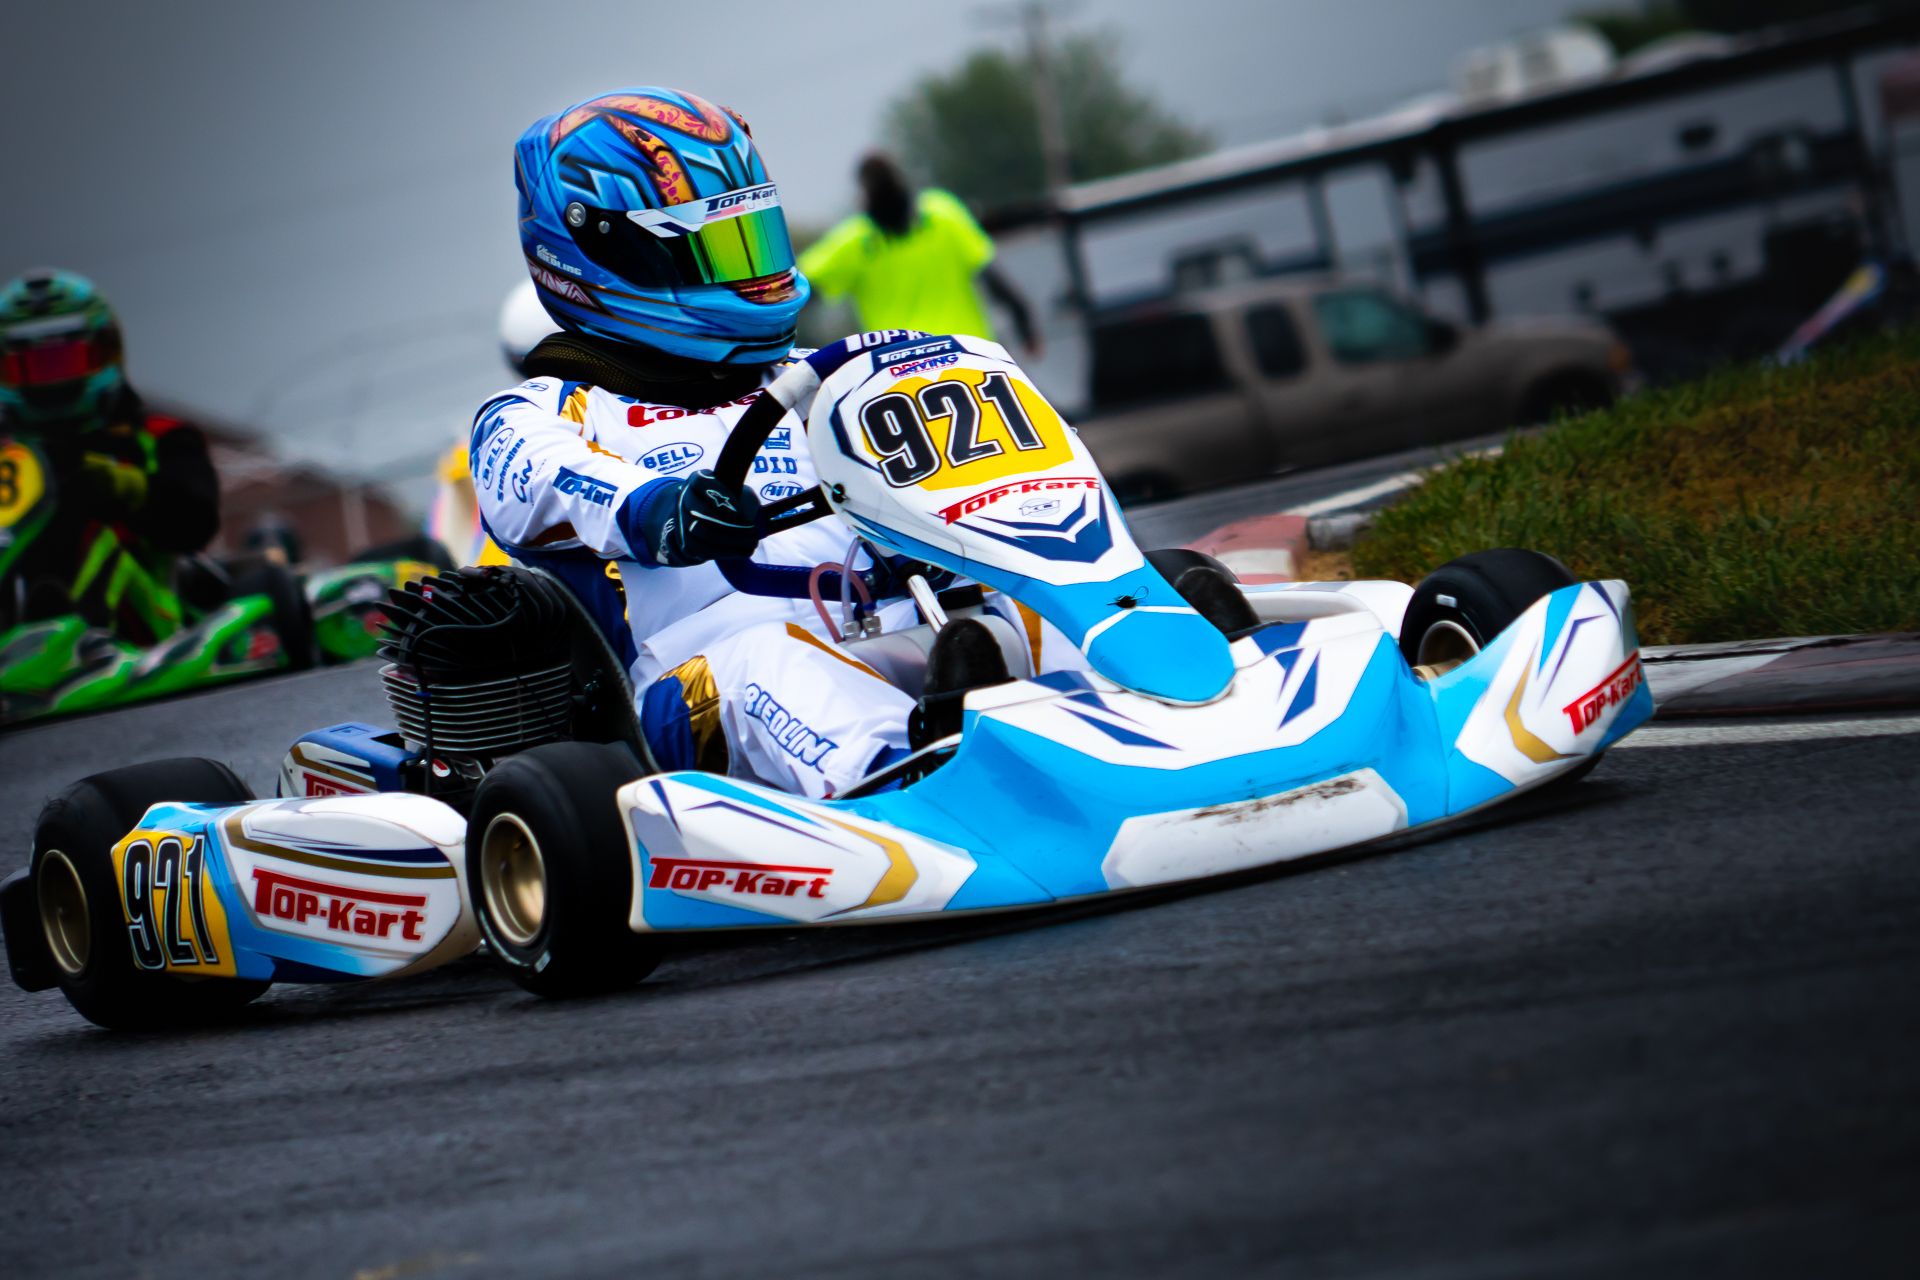 North American Importer and Distributor for the Italian Manufactured Top Kart Racing Chassis Kart USA